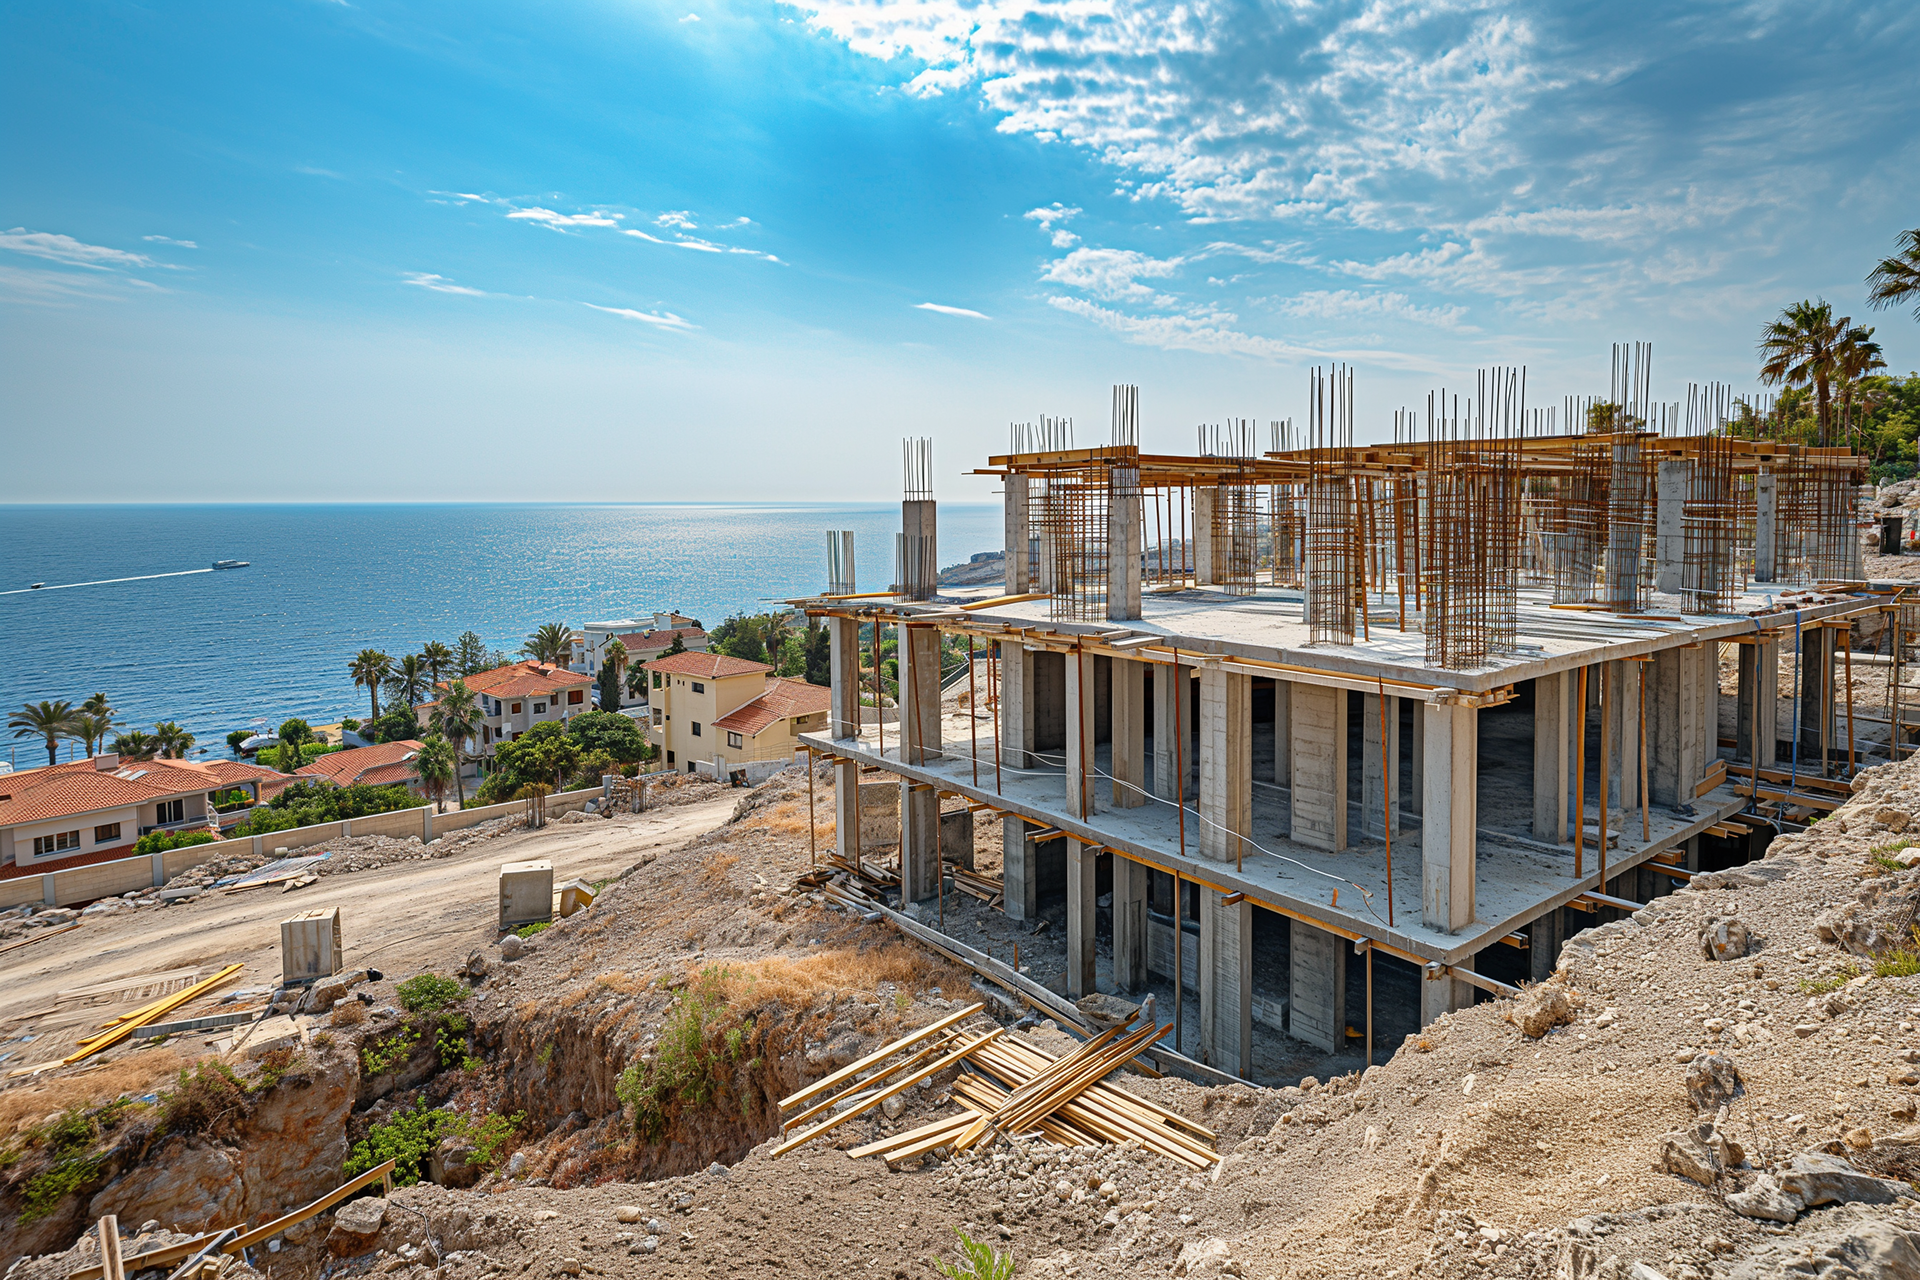 Construction material costs fall in Cyprus